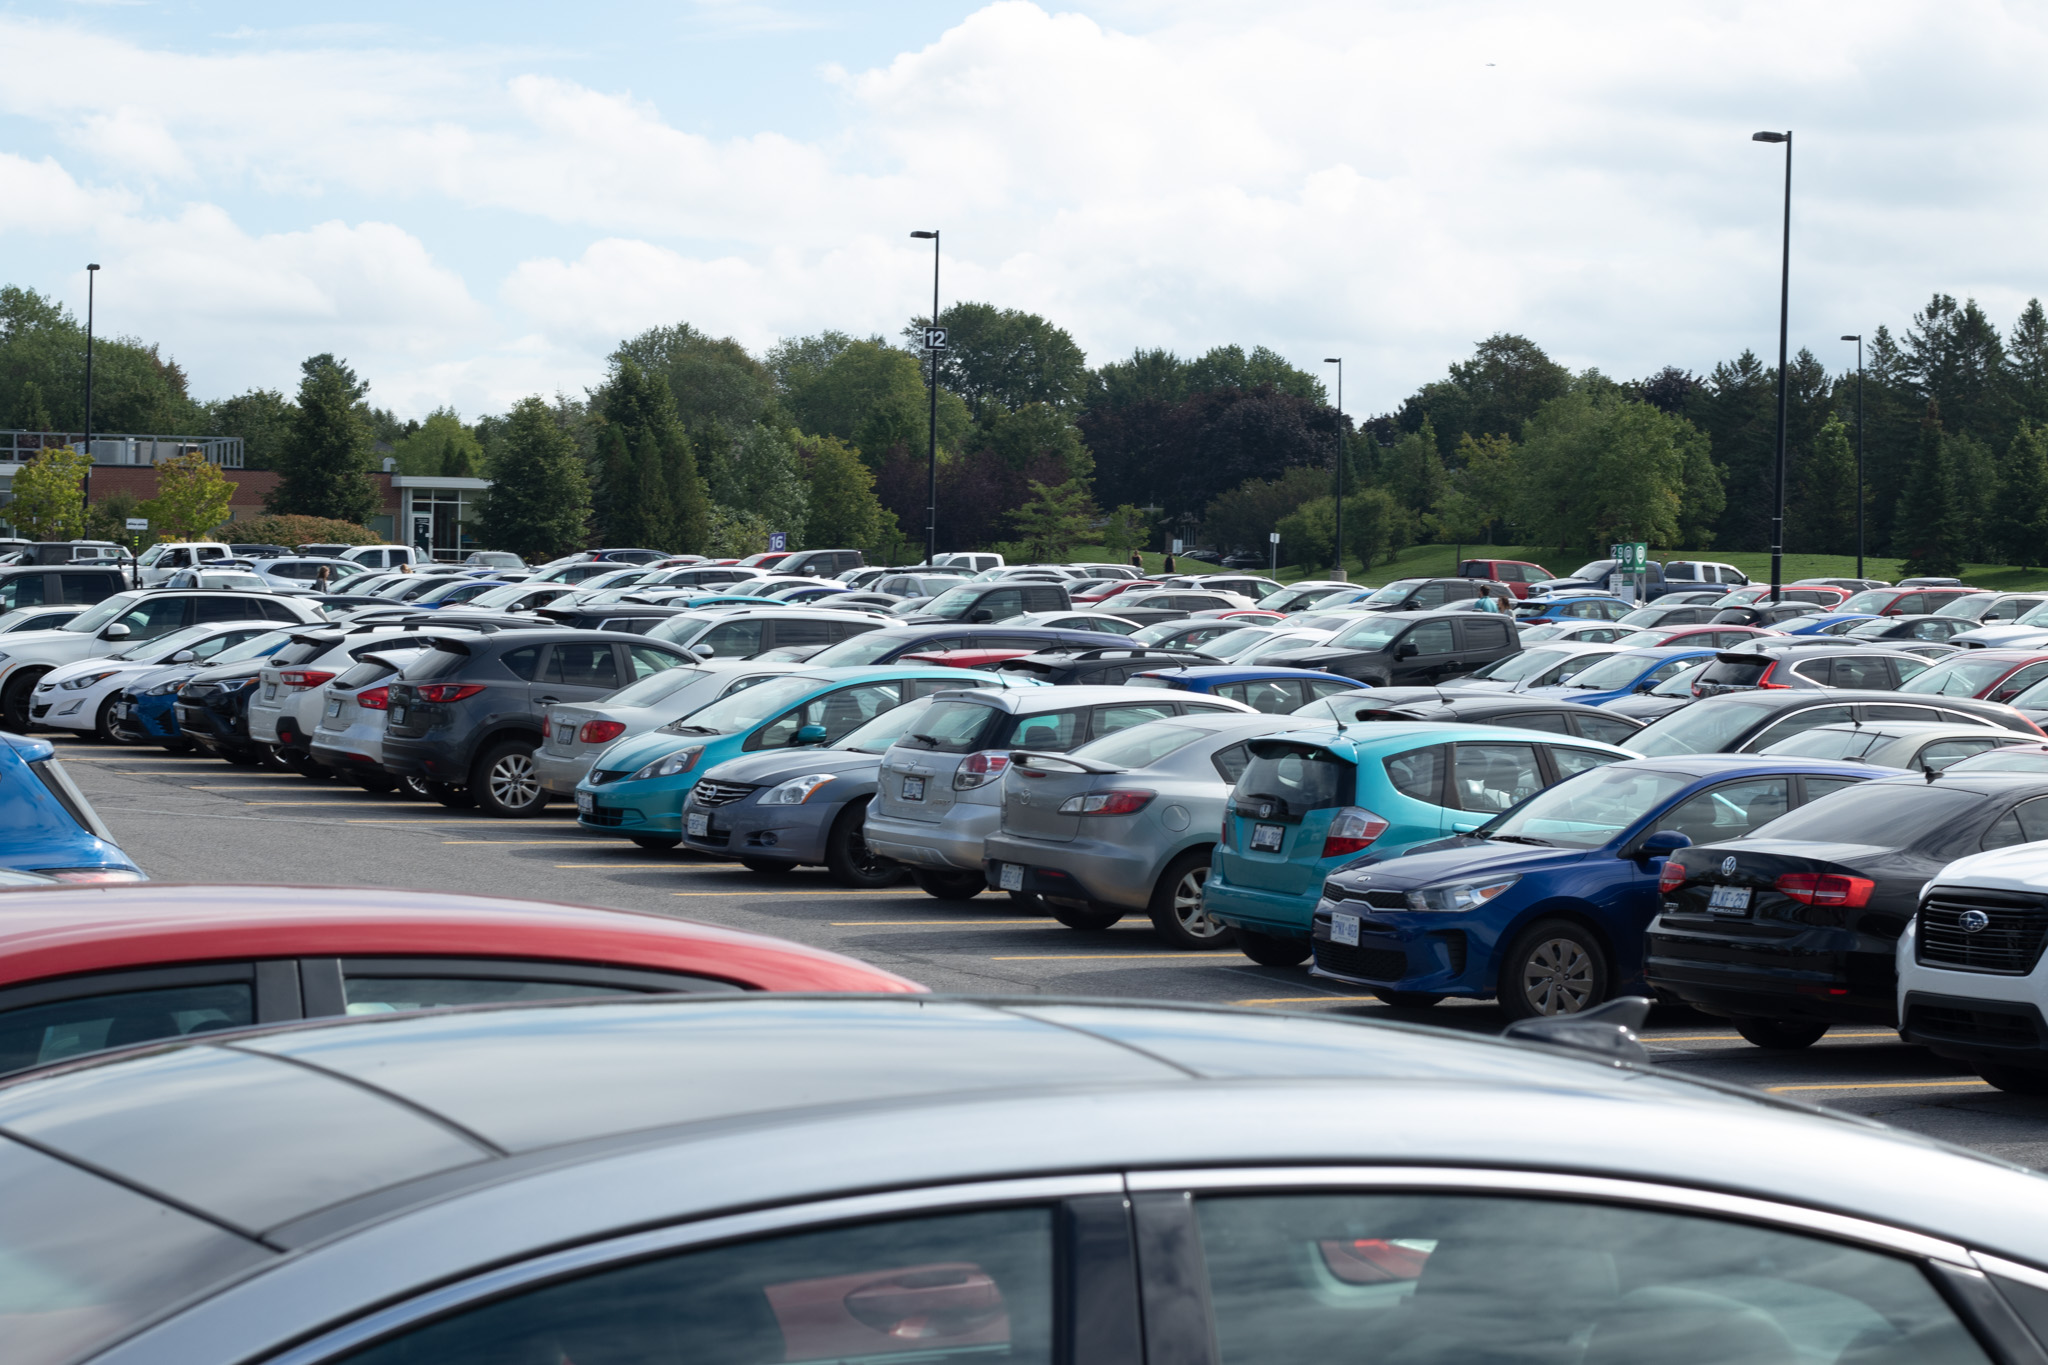 A green lot is filled with cars on a busy day.